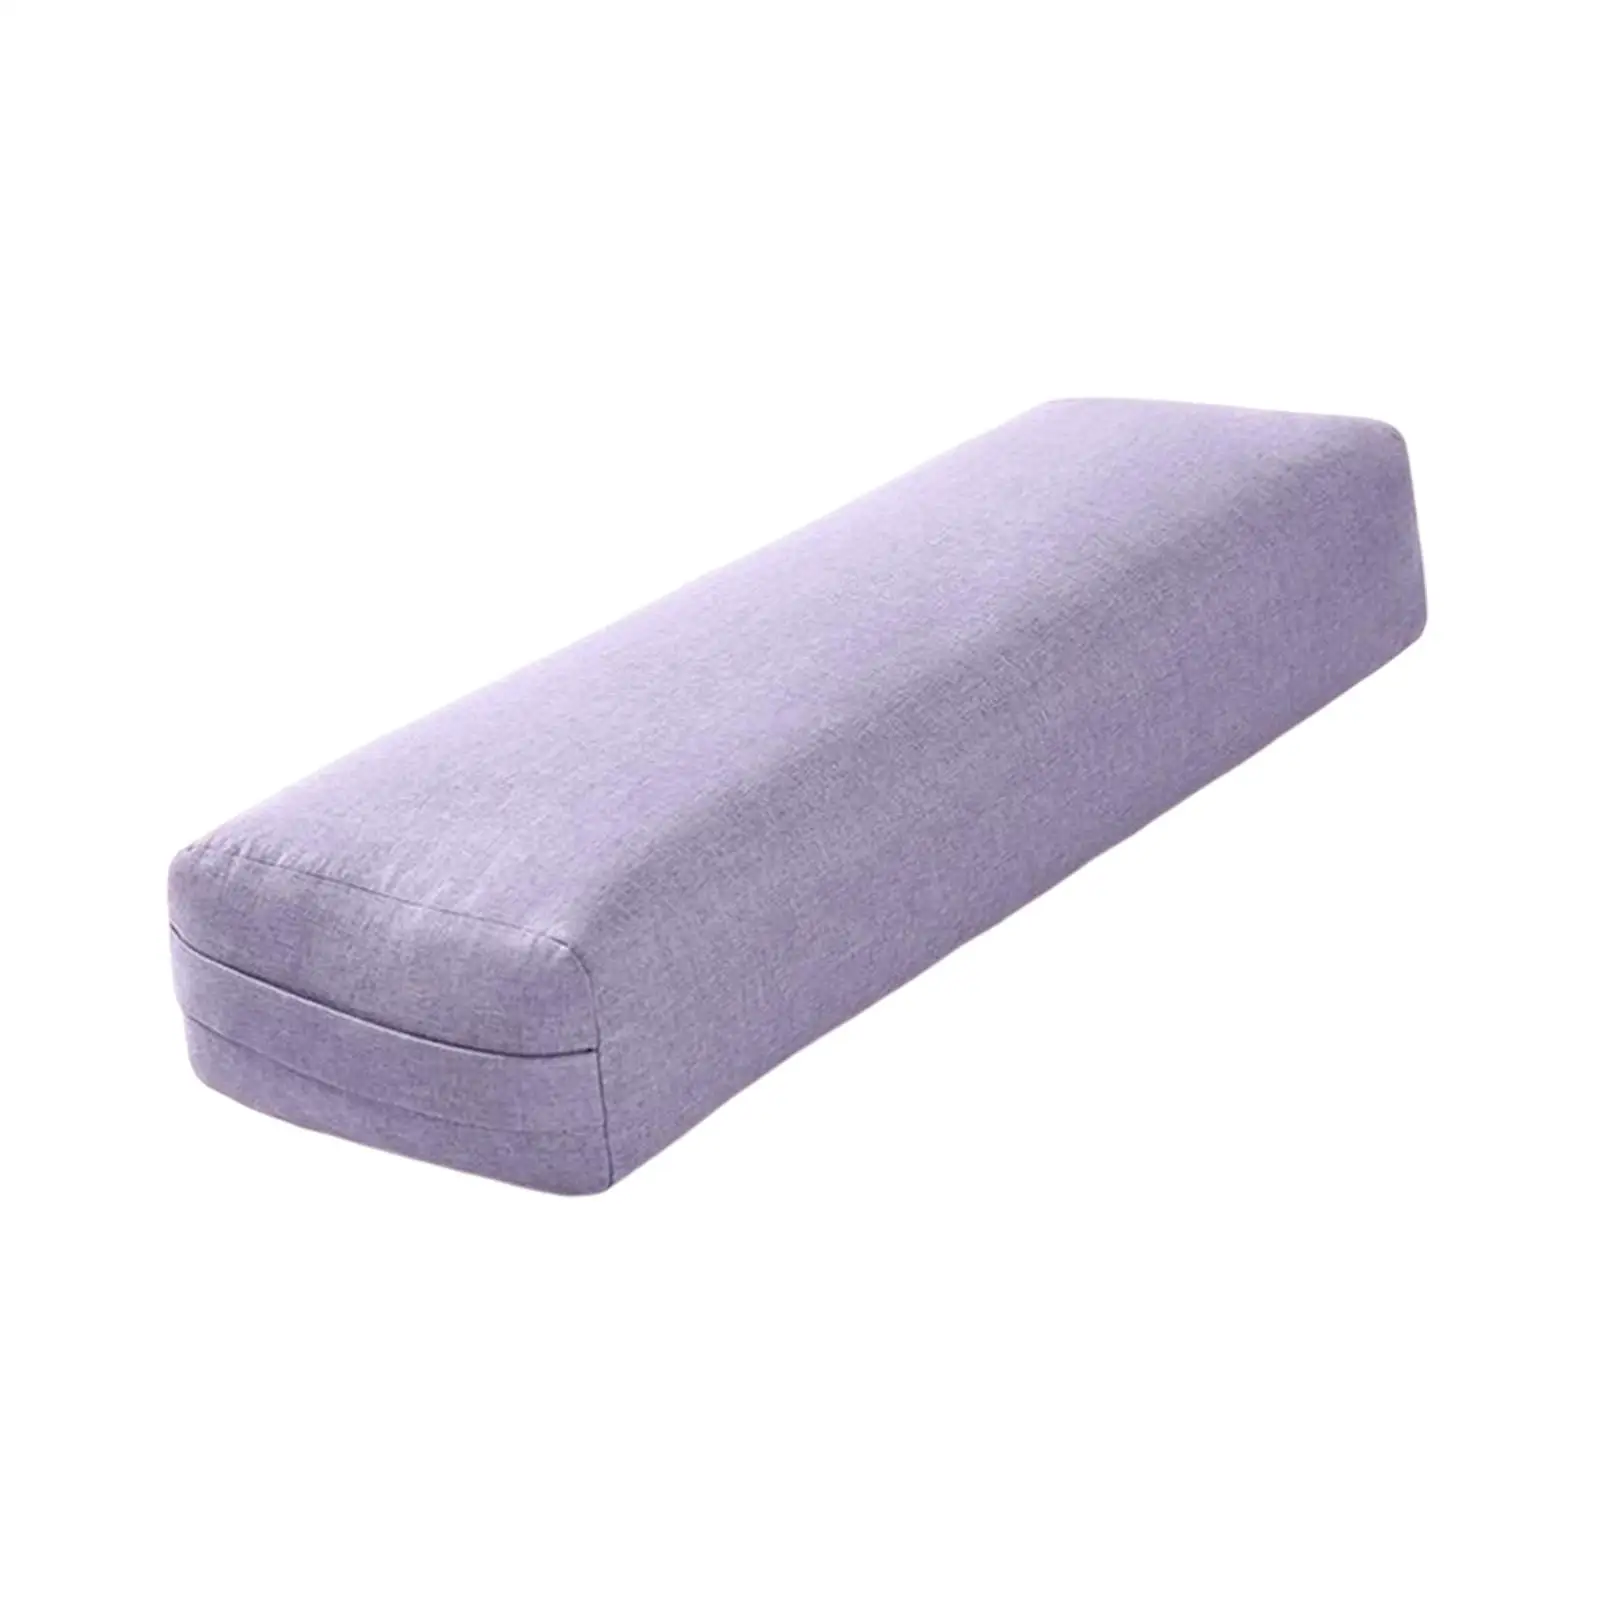 Professional Yoga Bolster with Carry Handle Pillow for Legs Restorative Yoga